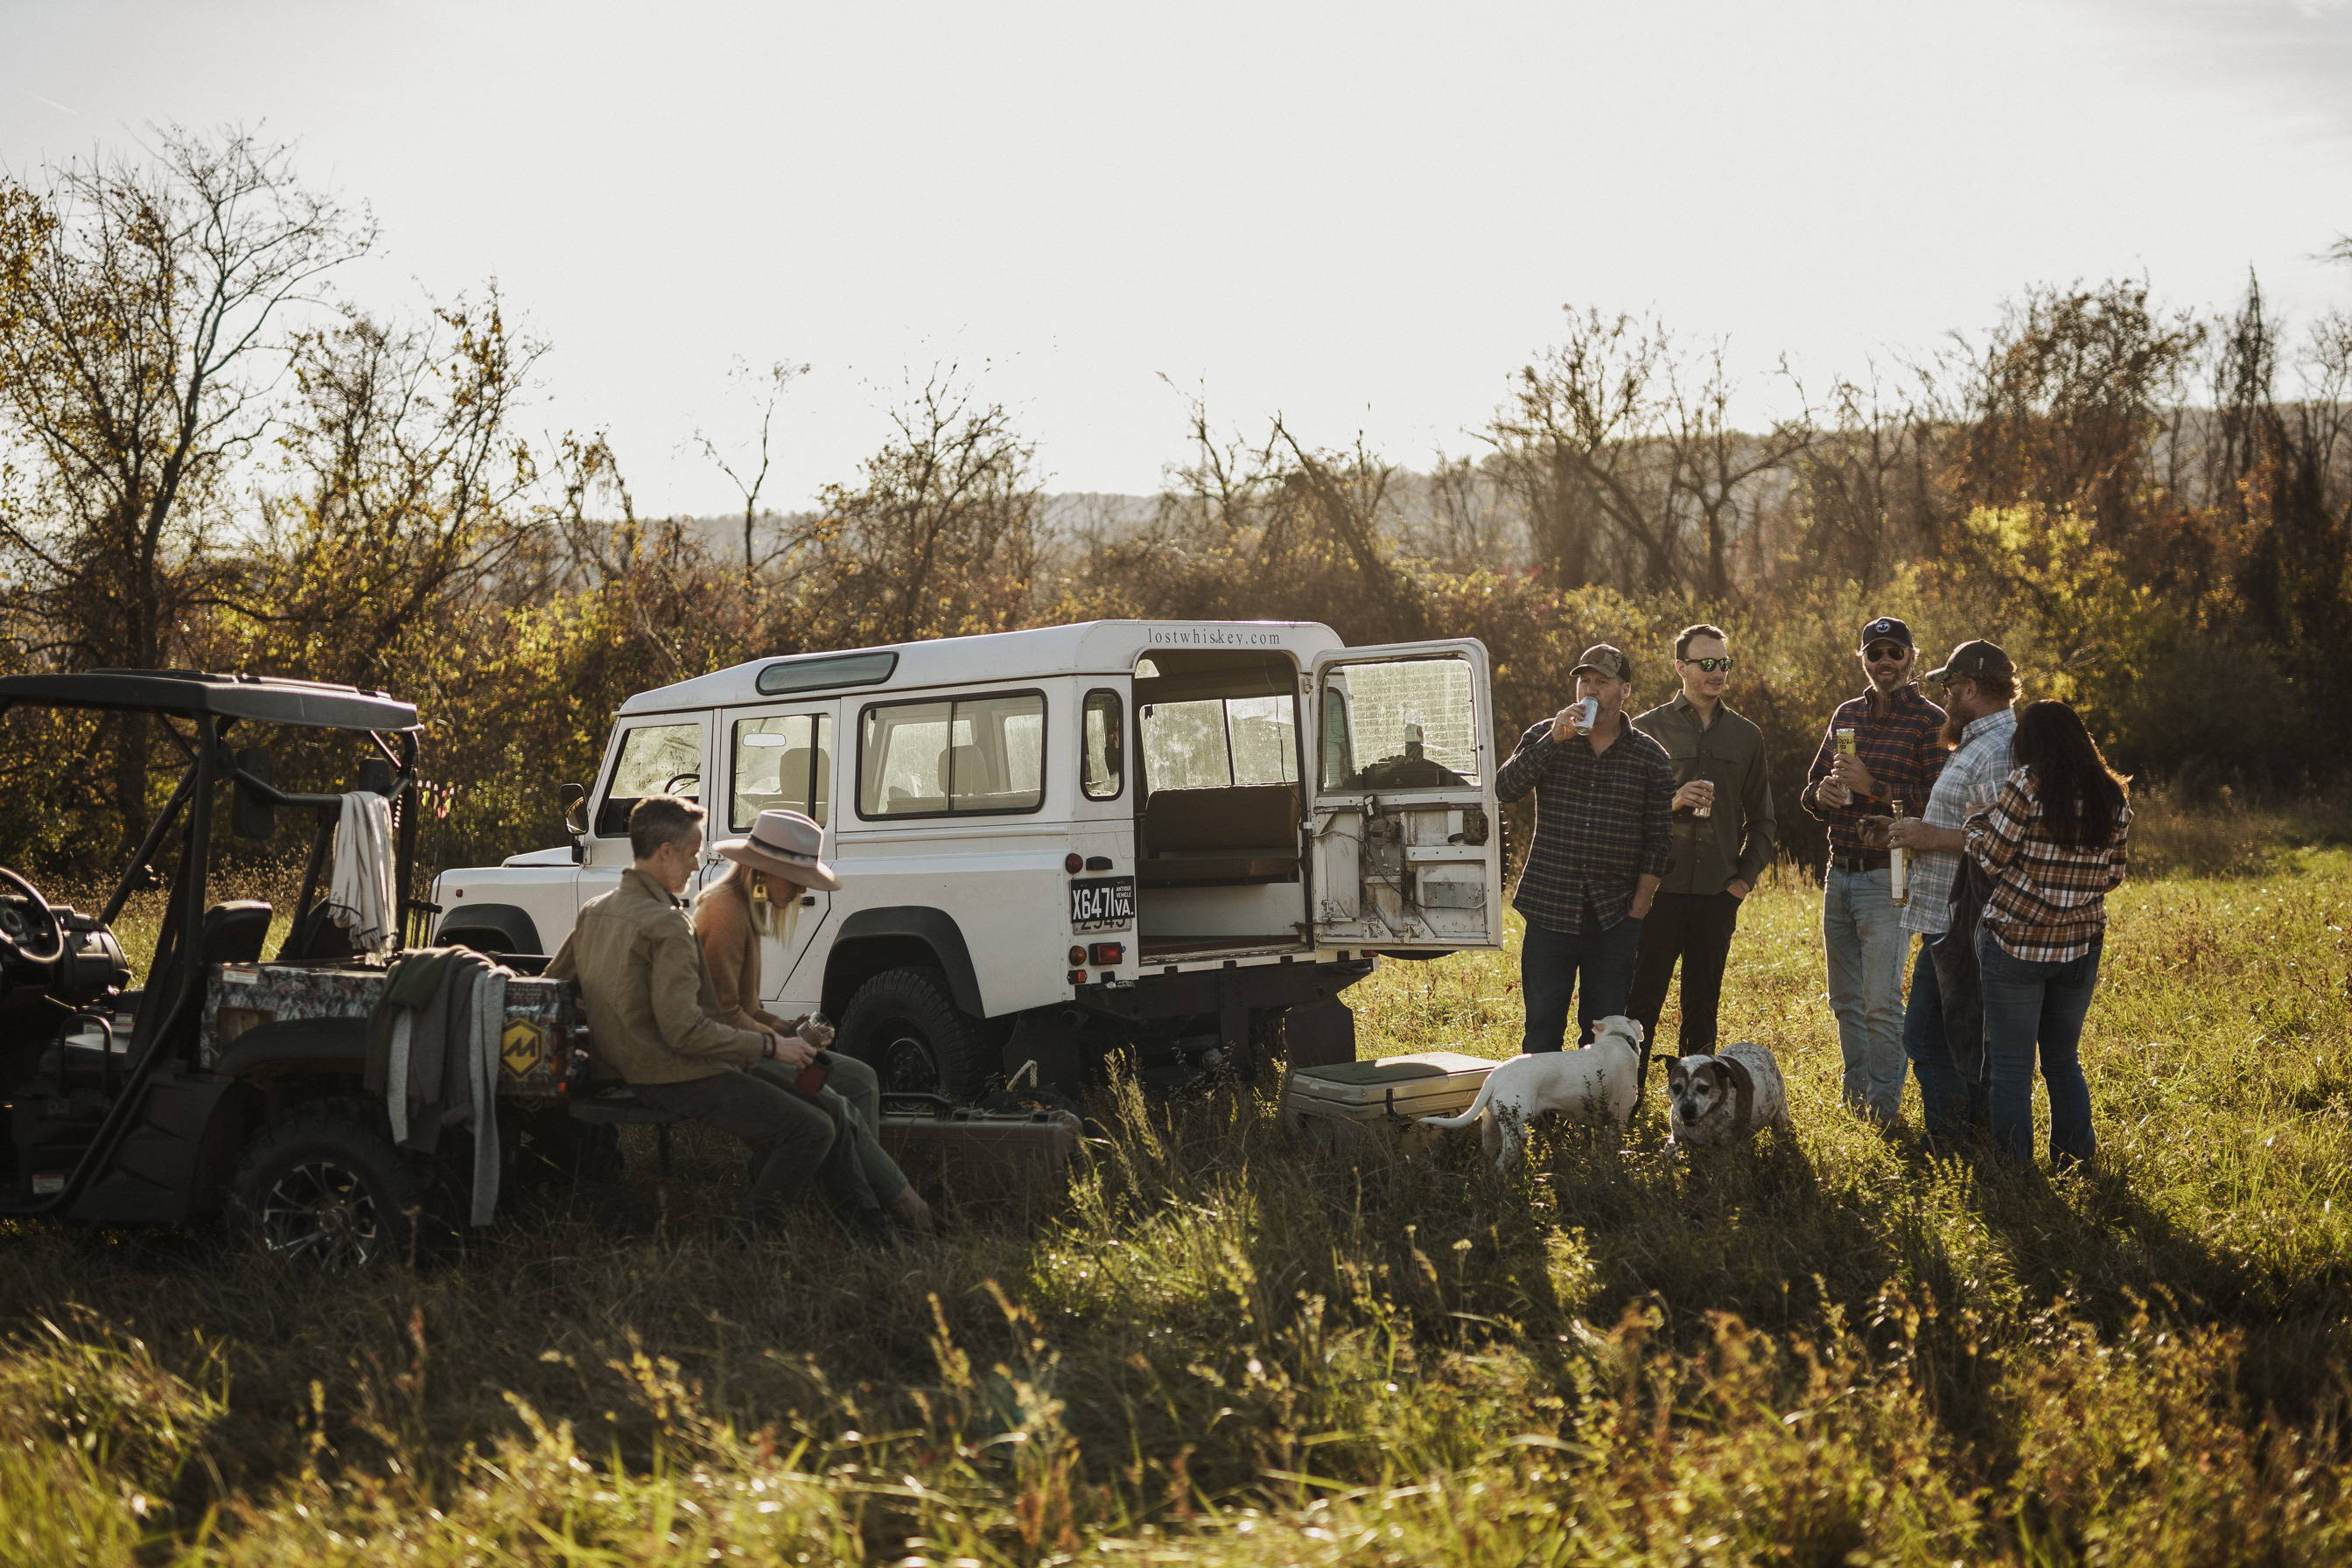 A group of people outdoors next to an antique vehicle and 4wd vehible drinking beer and having a good time.